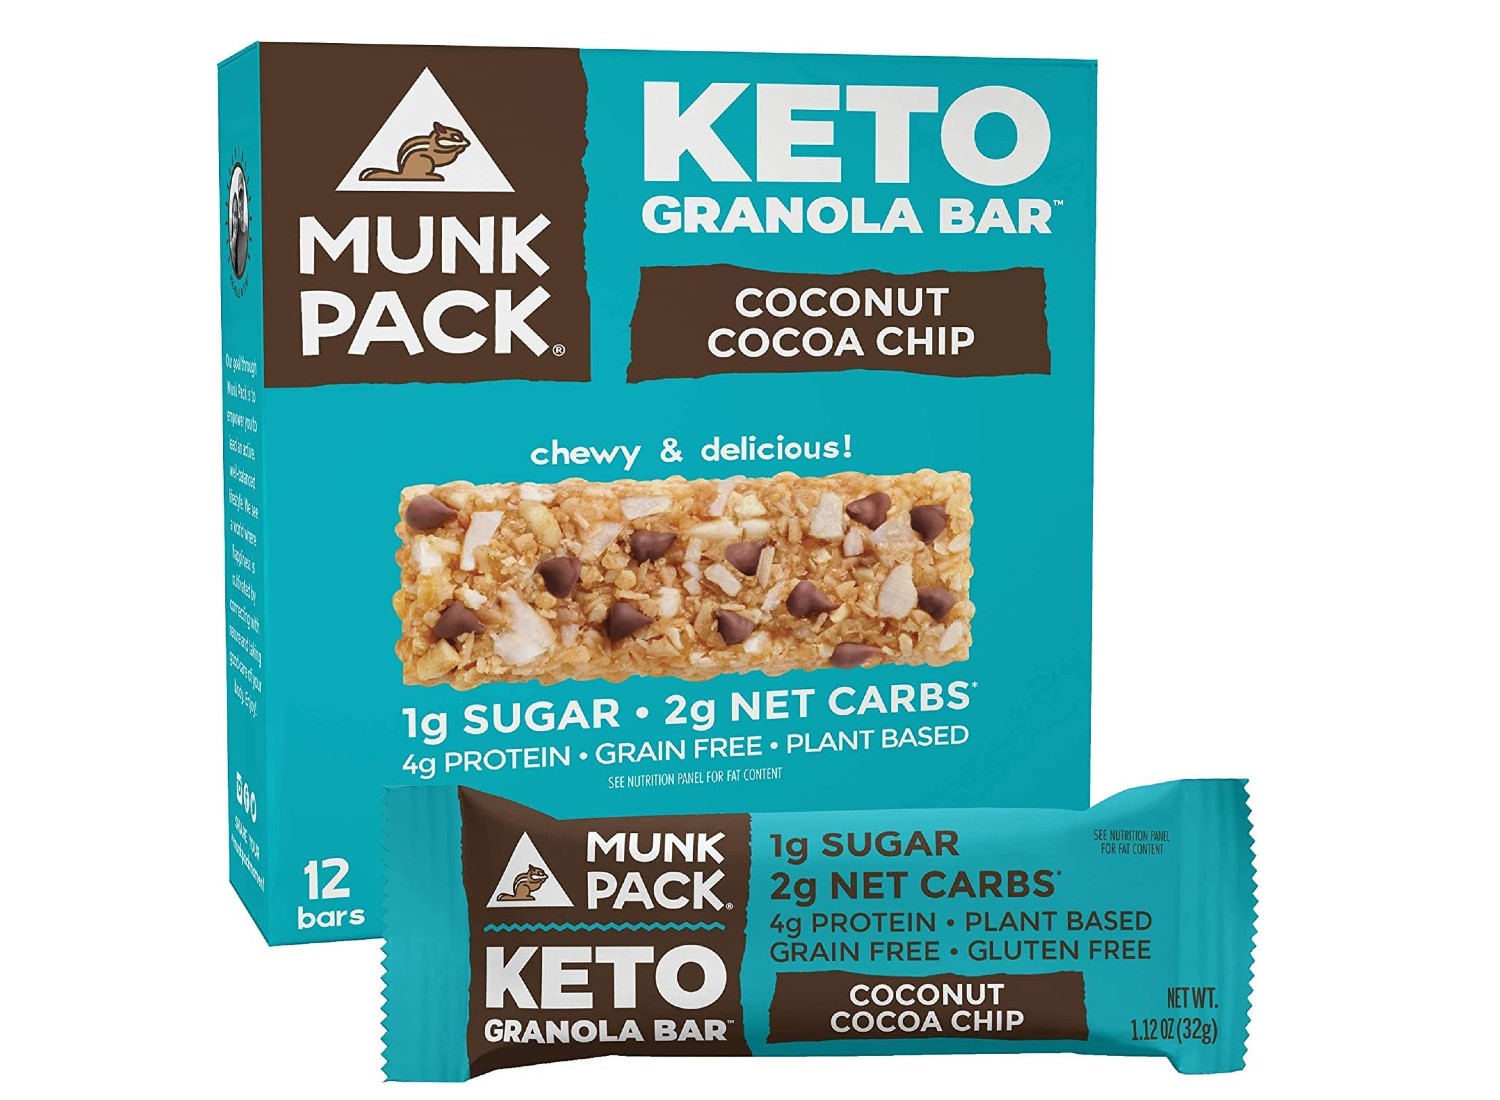 The Munk Pack Chewy Chocolate Chip Granola Bar sold on Amazon